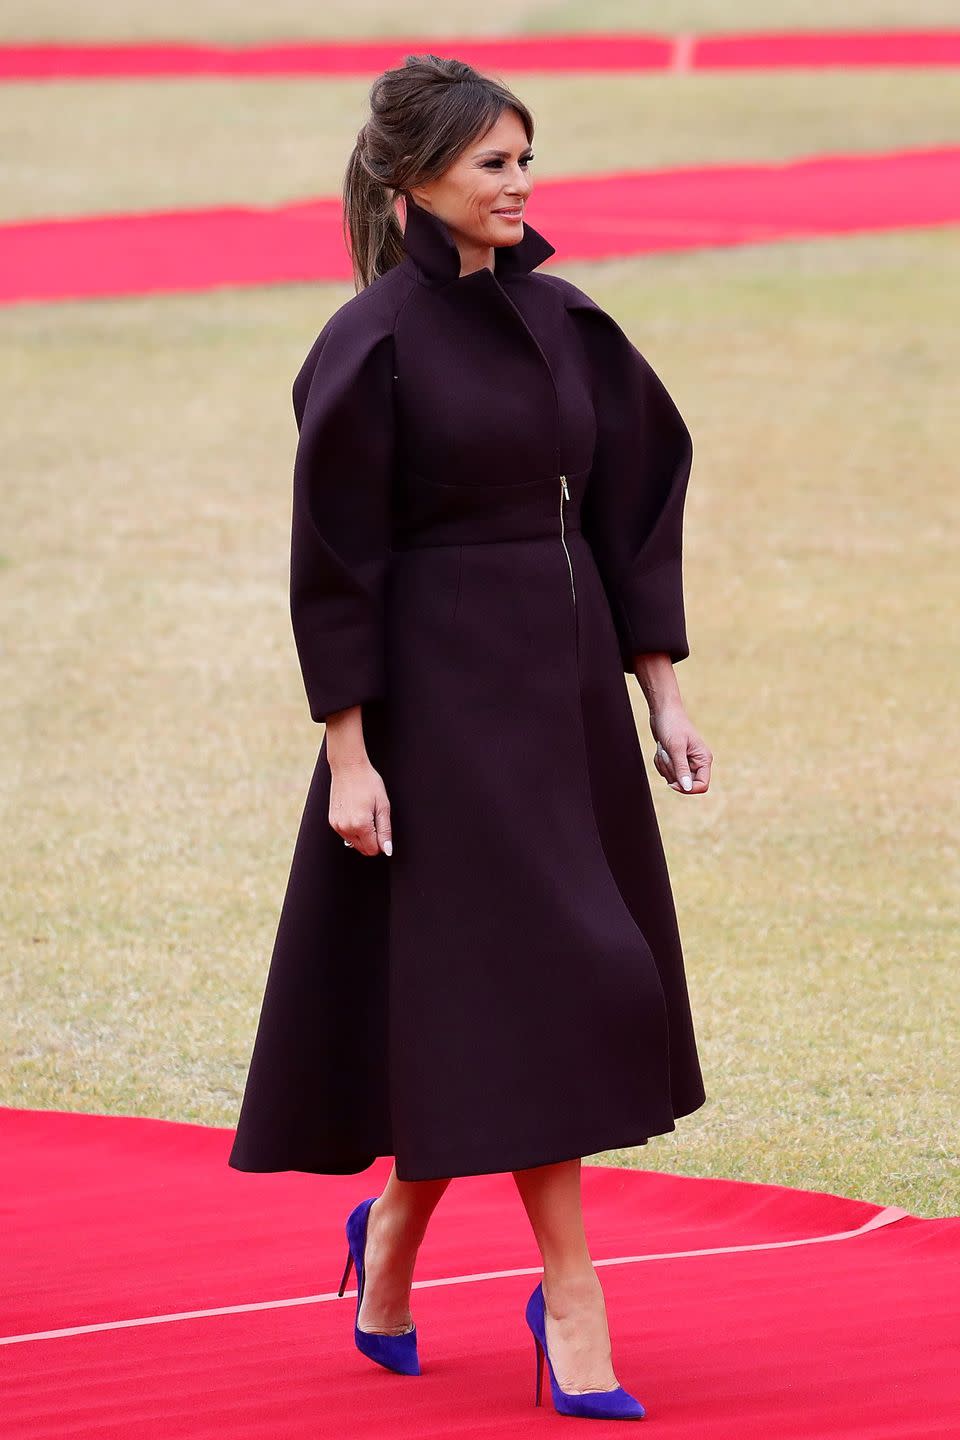 <p>Arriving in South Korea, FLOTUS wore a deep burgundy Delpozo coat dress paired with blue-violet stiletto pumps. Look familiar? She wore a bright fuchsia dress from the brand in a similar silhouette for her <a href="https://www.townandcountrymag.com/society/politics/a12444274/melania-trump-united-nations-speech/" rel="nofollow noopener" target="_blank" data-ylk="slk:United Nations speech" class="link ">United Nations speech</a> back in September.</p>